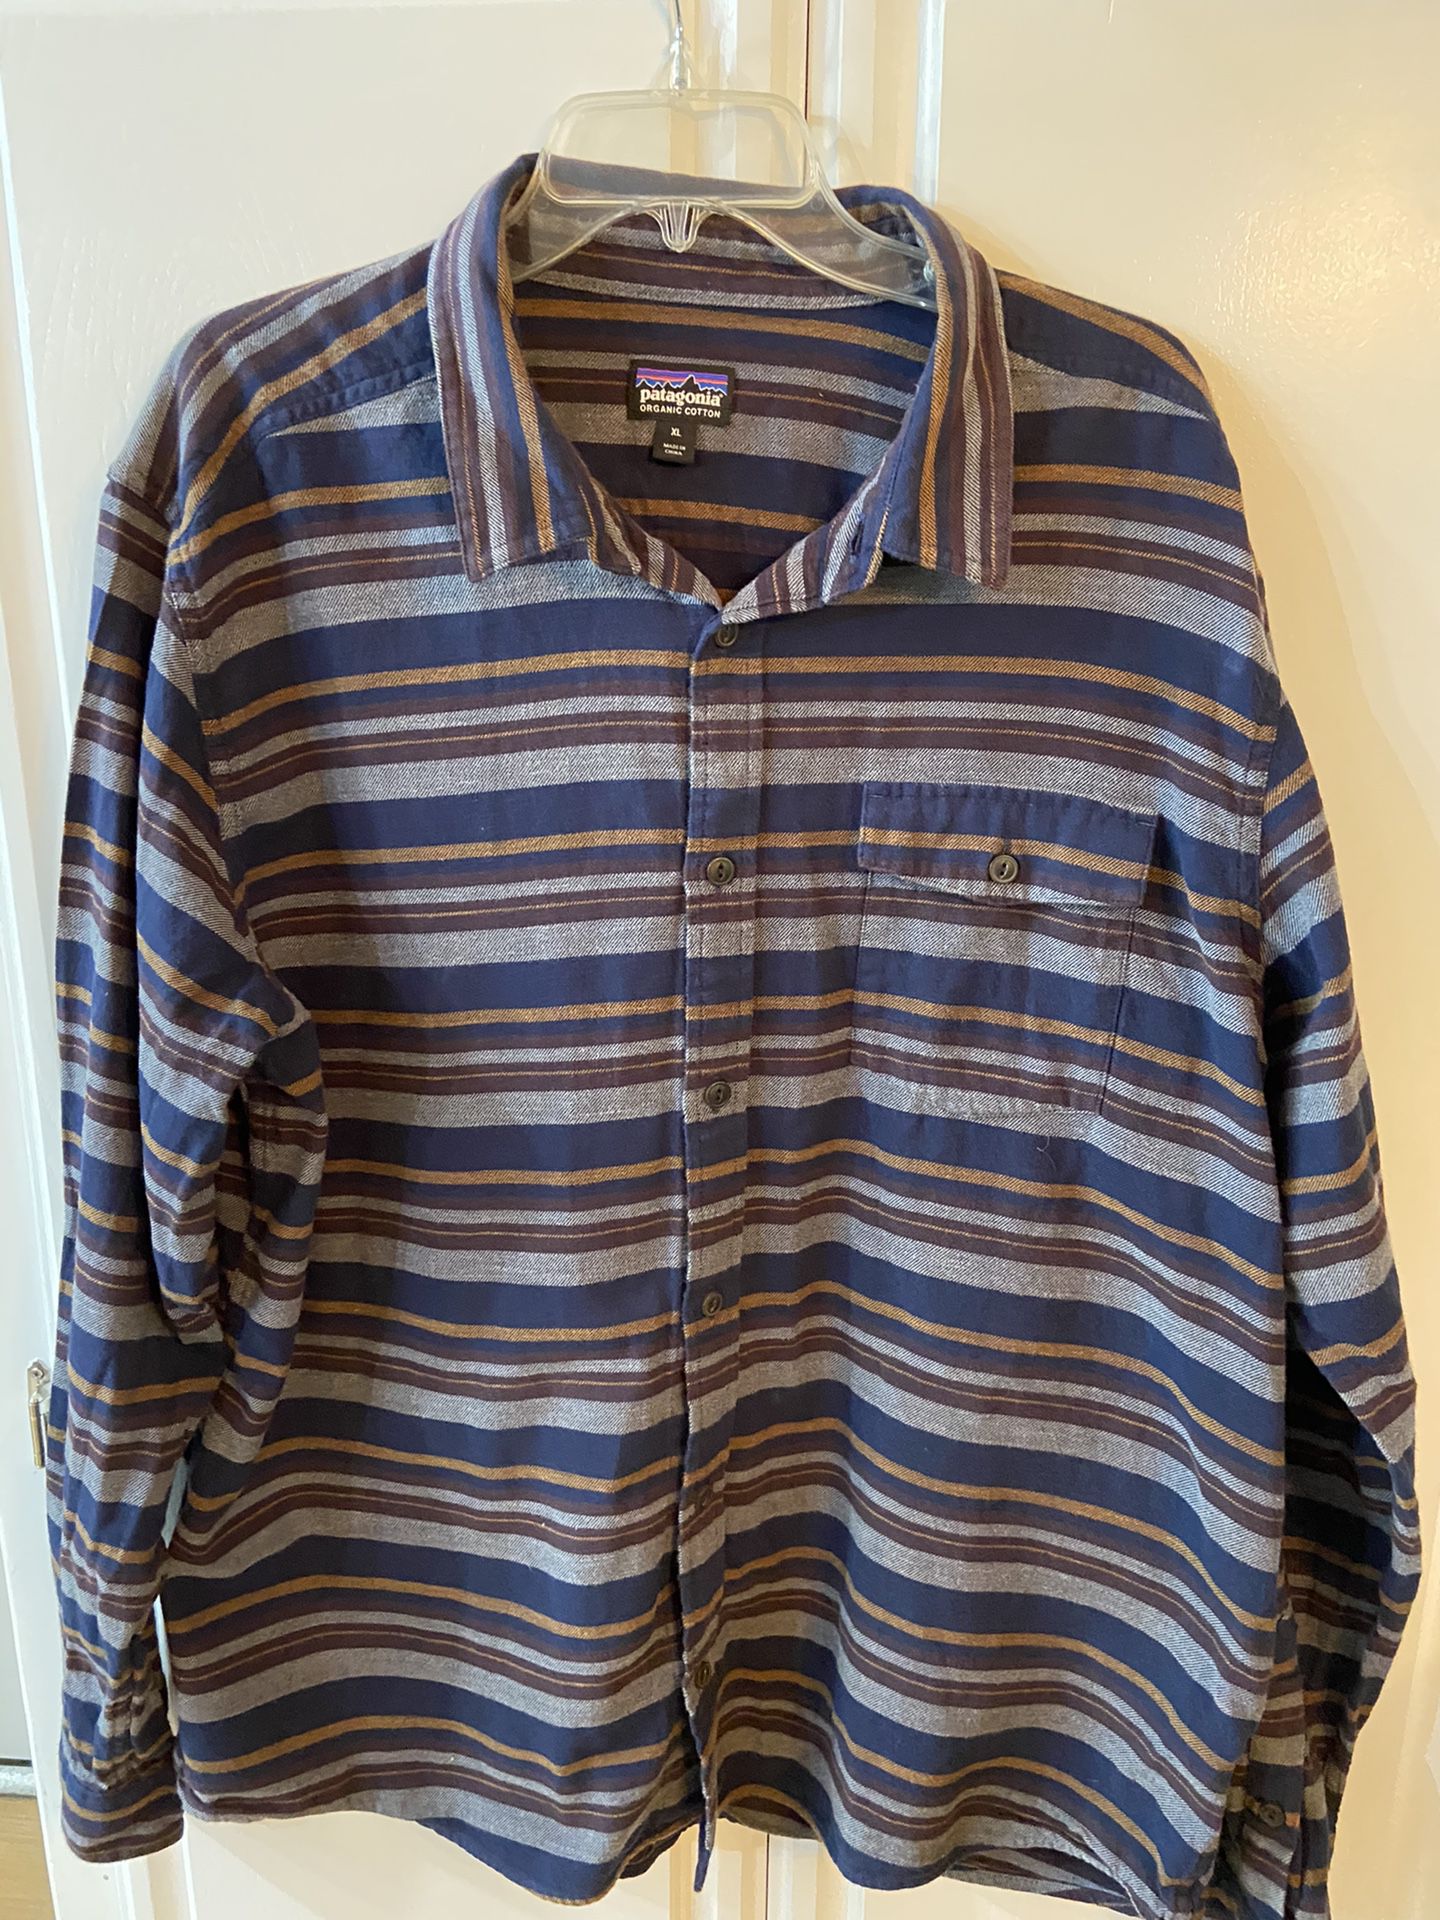 Patagonia long sleeve men’s shirt size XL excellent condition